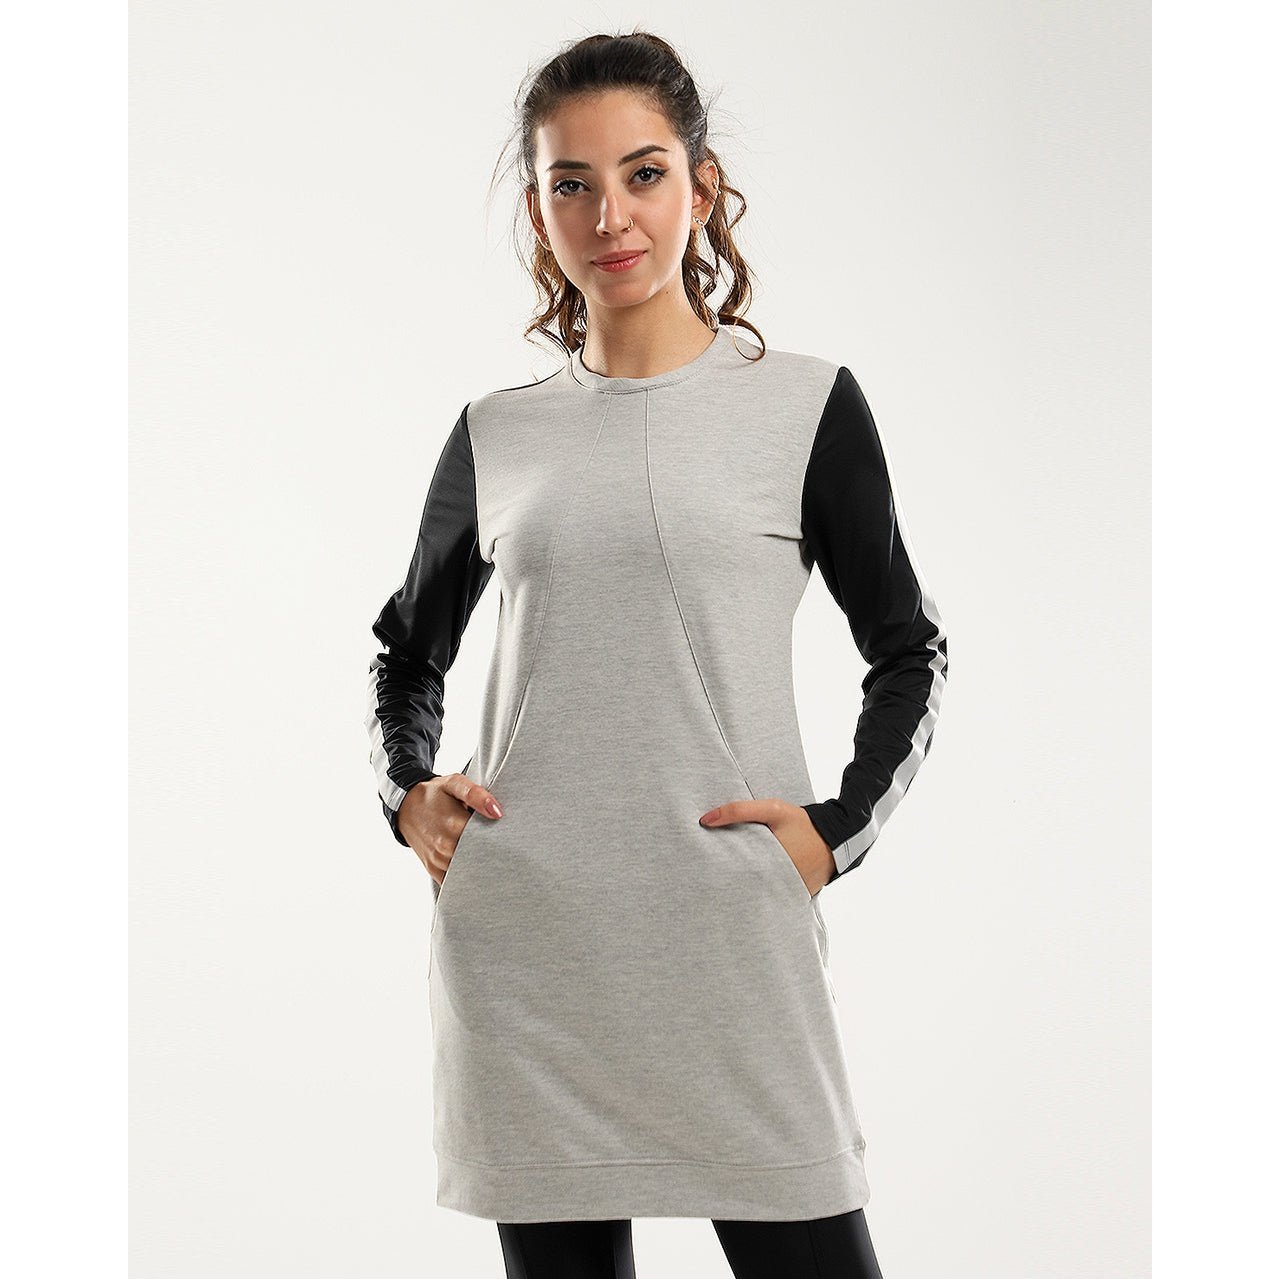 Heather Grey Shades Zipped Long Sweatshirt With Front Pockets - Sporty Pro